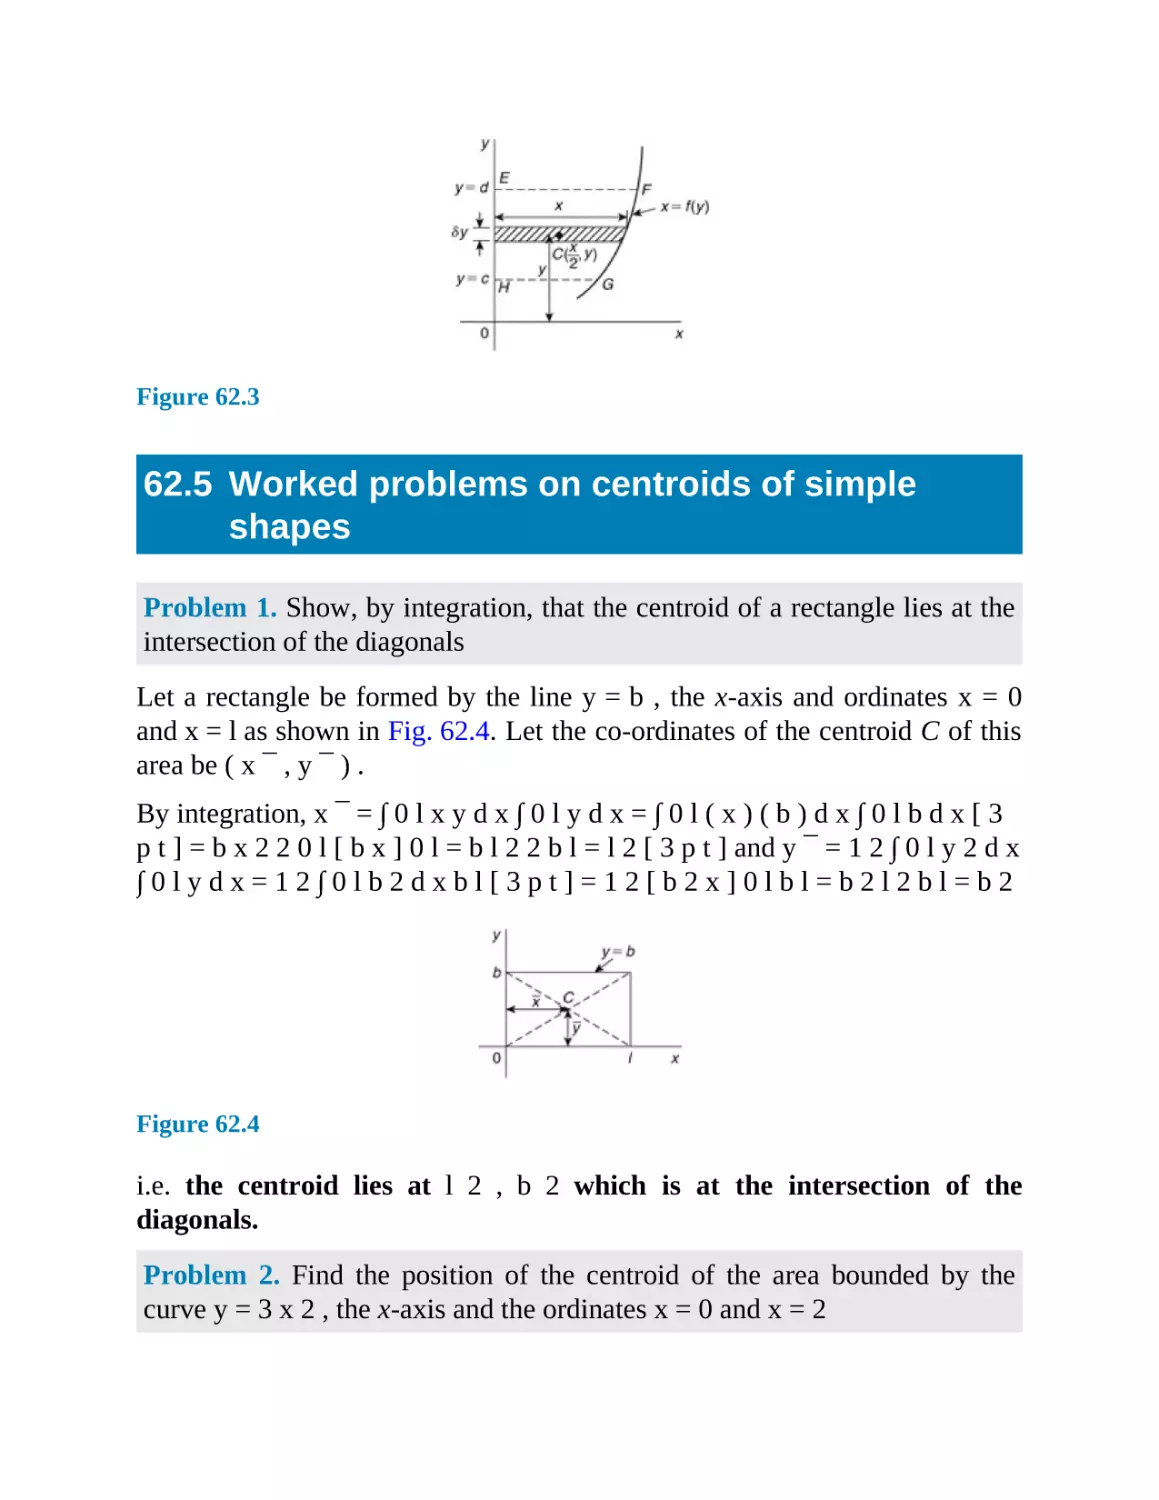 62.5 Worked problems on centroids of simple shapes